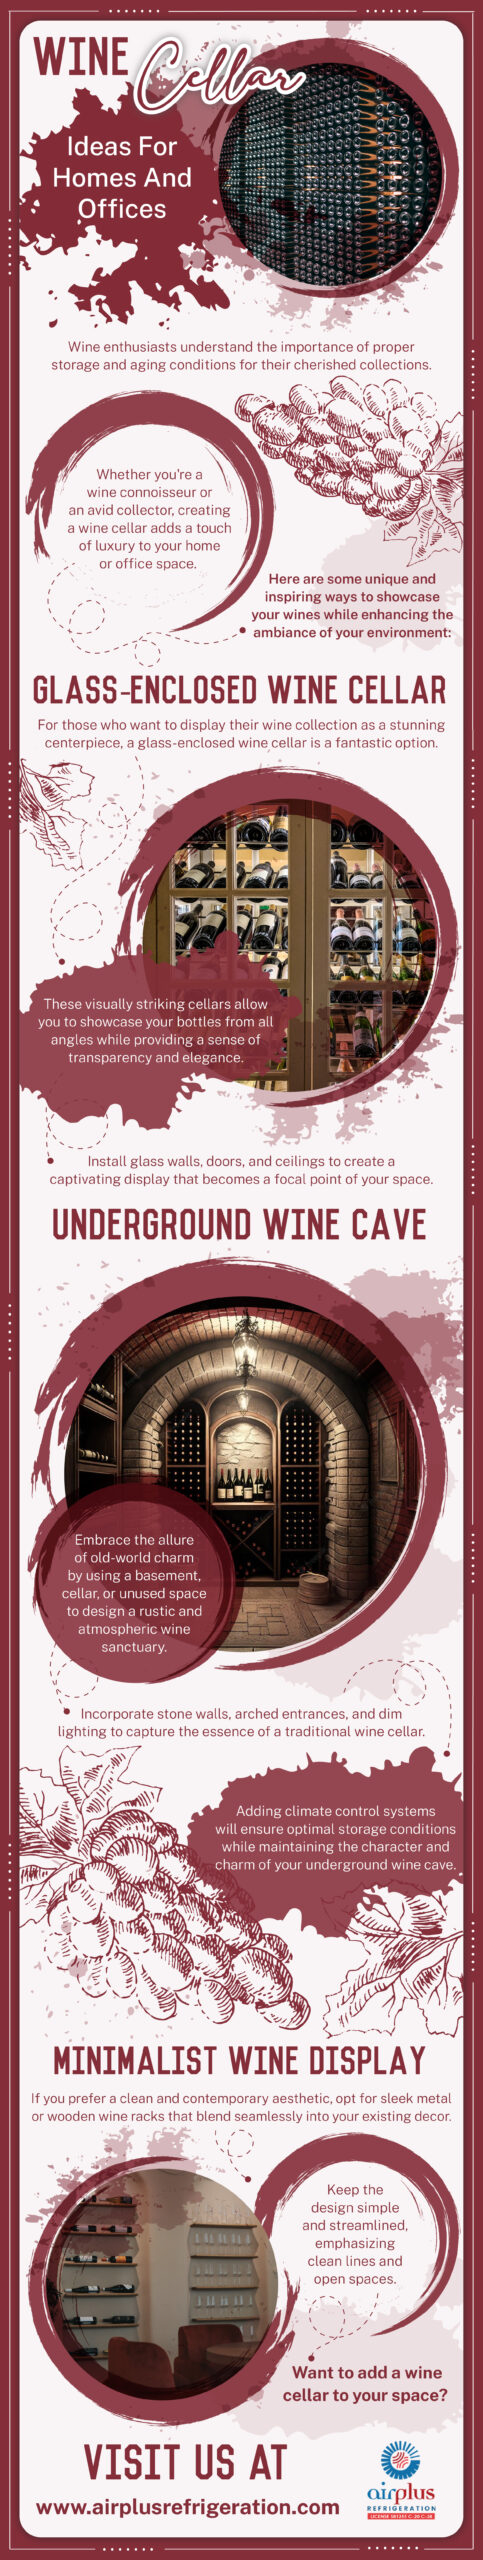 Wine cellar ideas for homes and offices